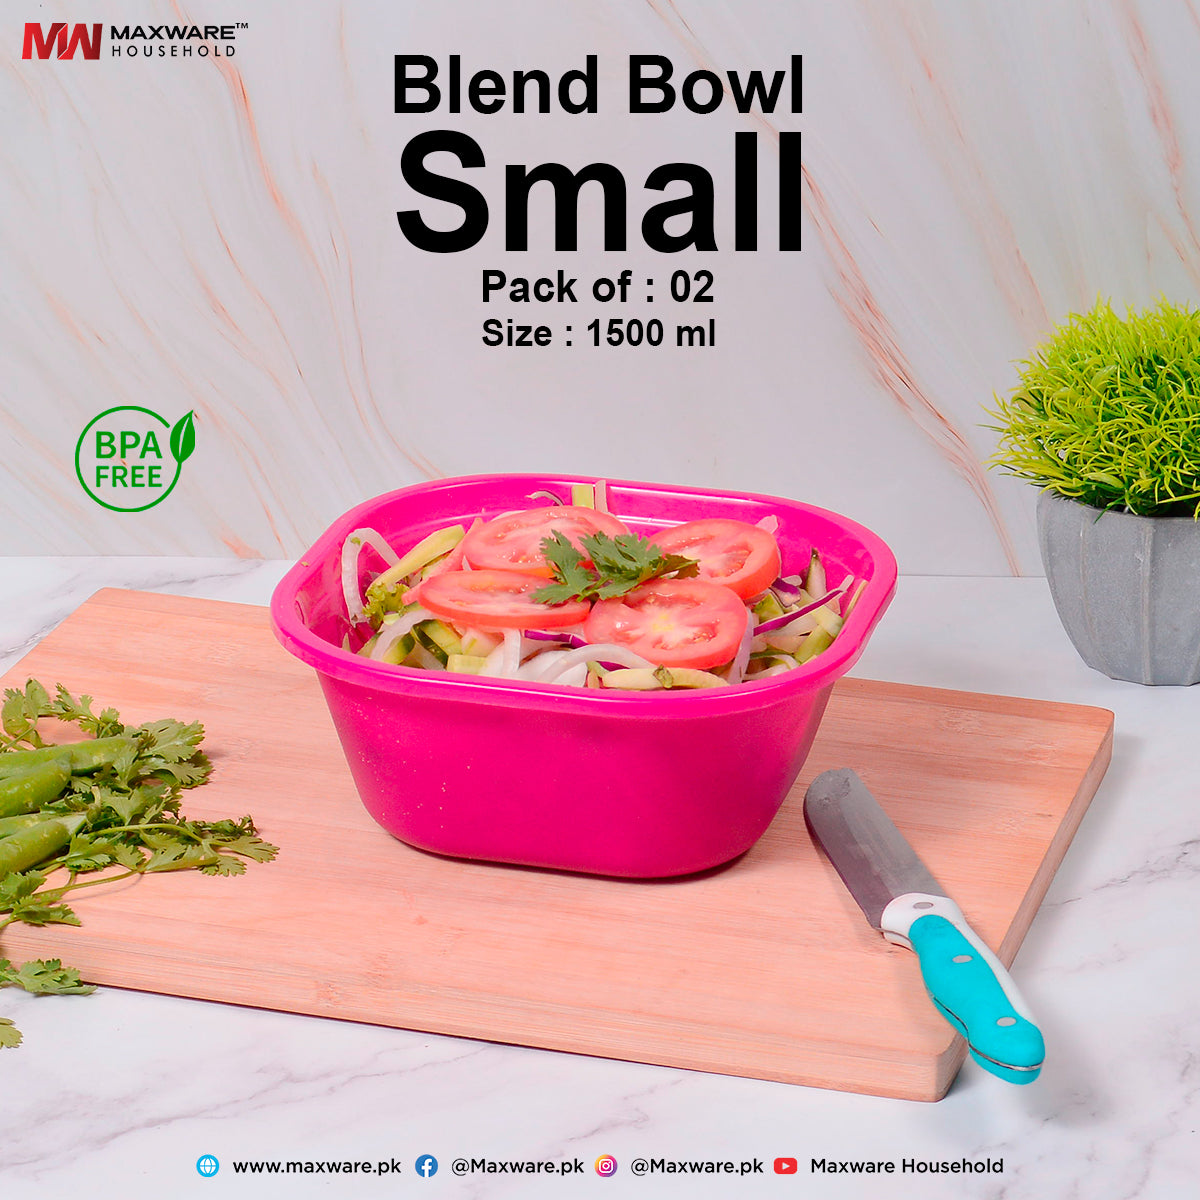 Blend Bowl Small Pack of 2 (1500 ml)